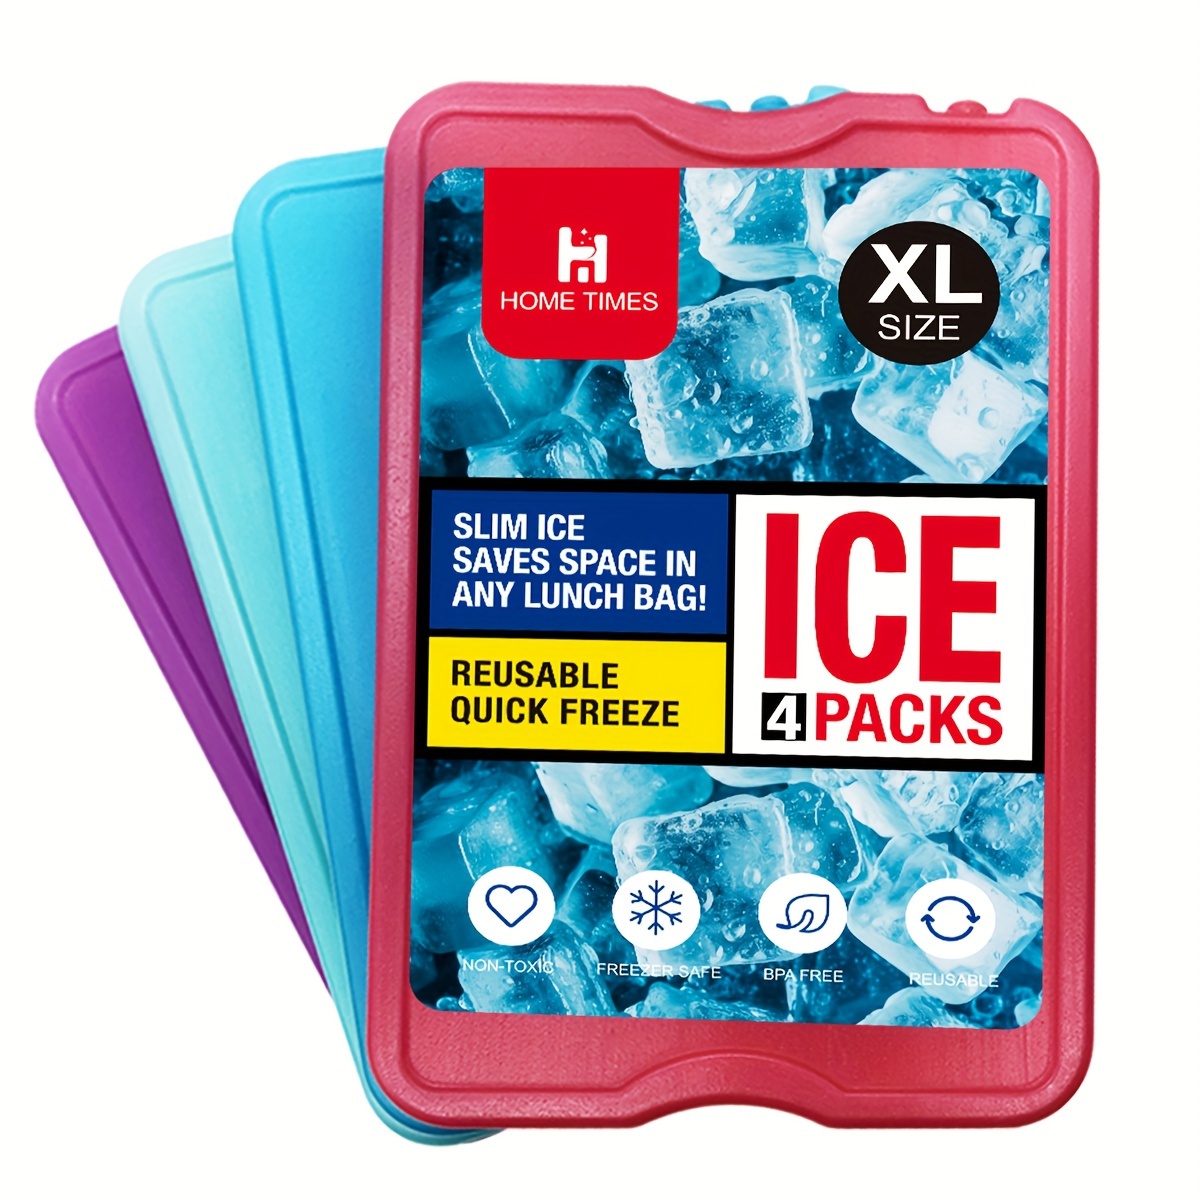 

4 Ice Packs For Lunch Box, Freezer Ice Packs Slim Long Lasting Cool Packs For Lunch Bags And Cooler